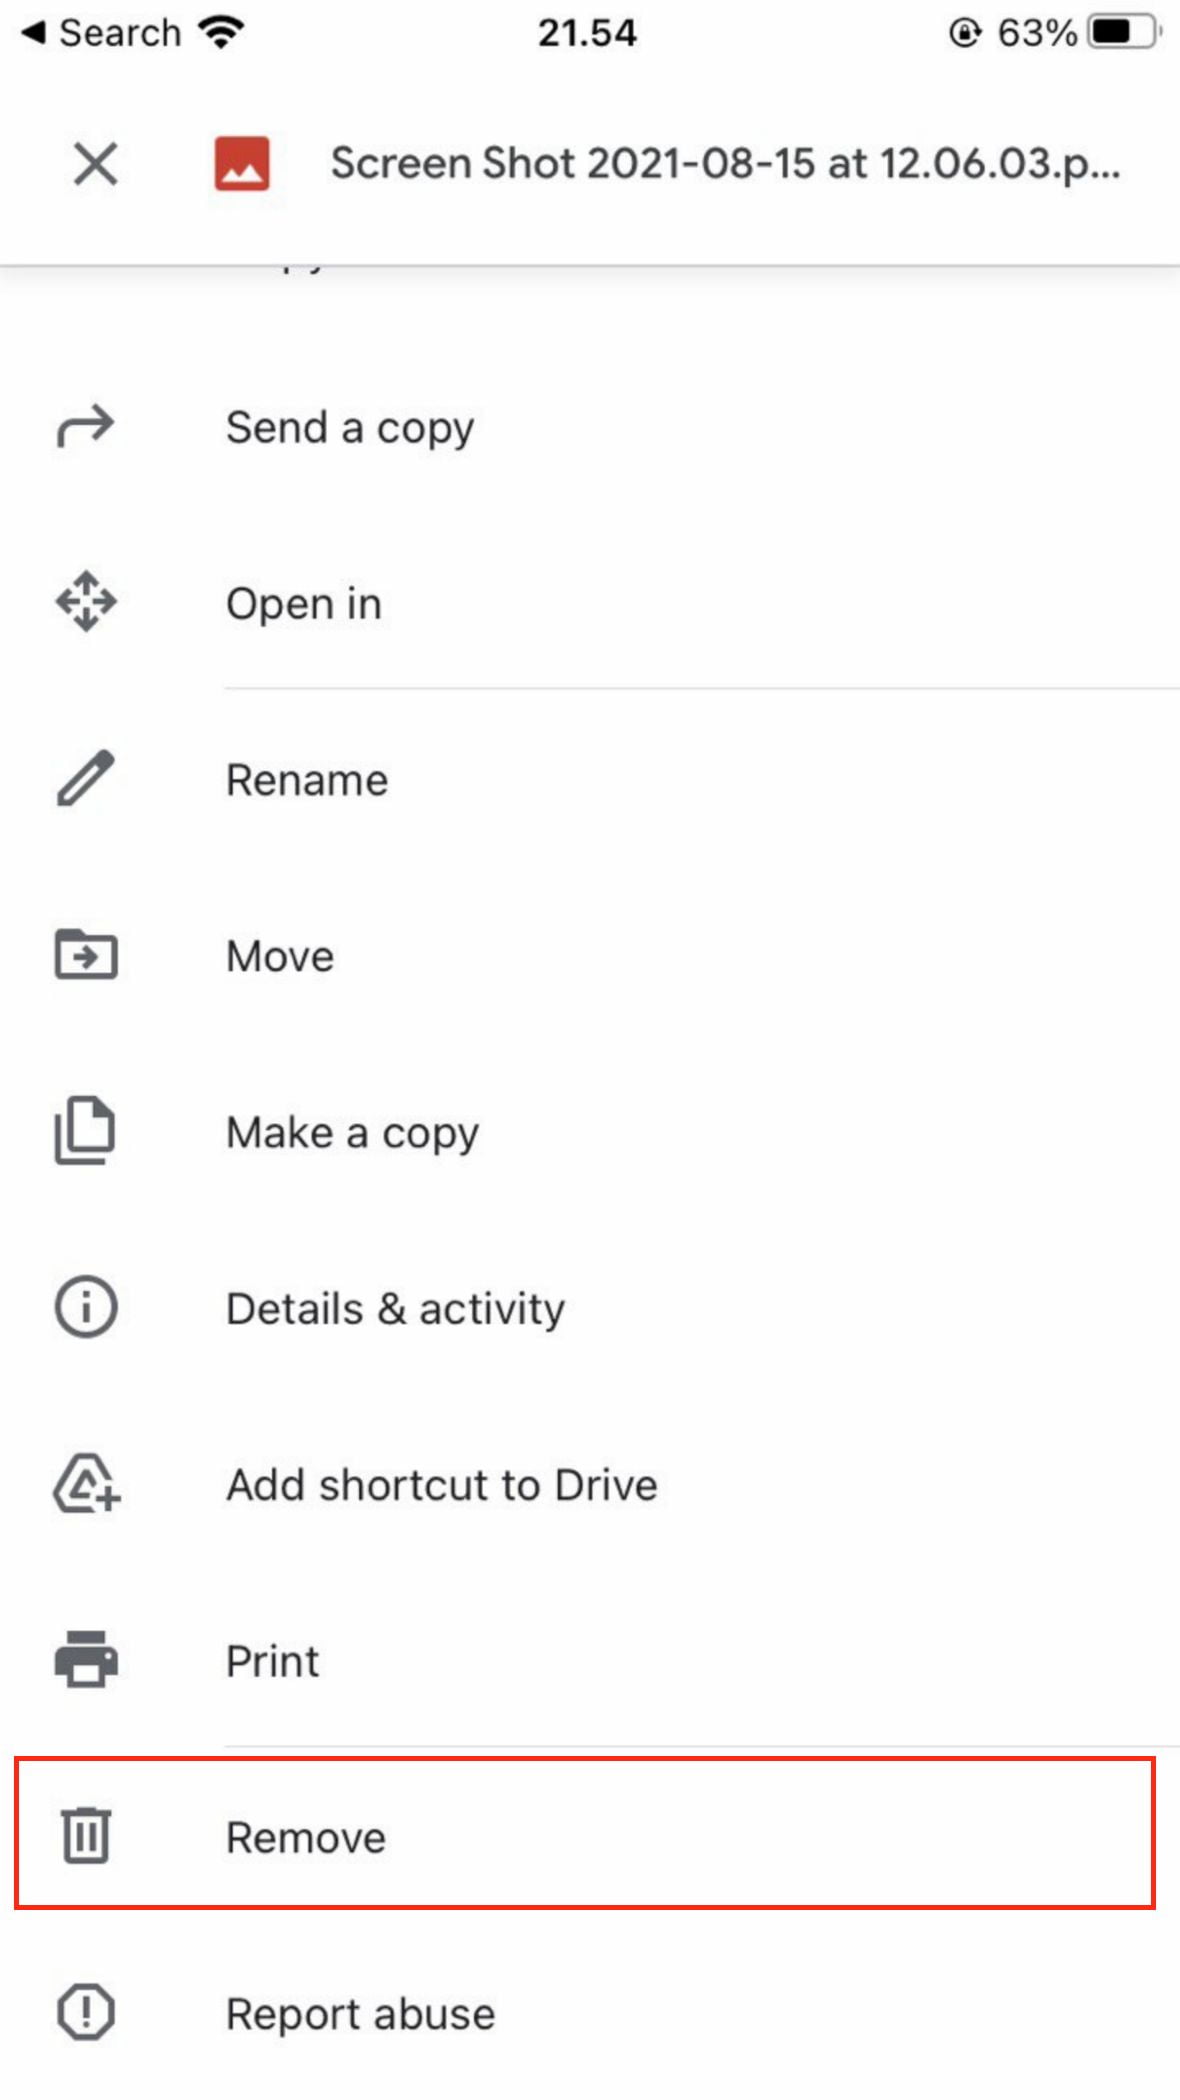 How to Delete Files From Google Drive on an iPhone